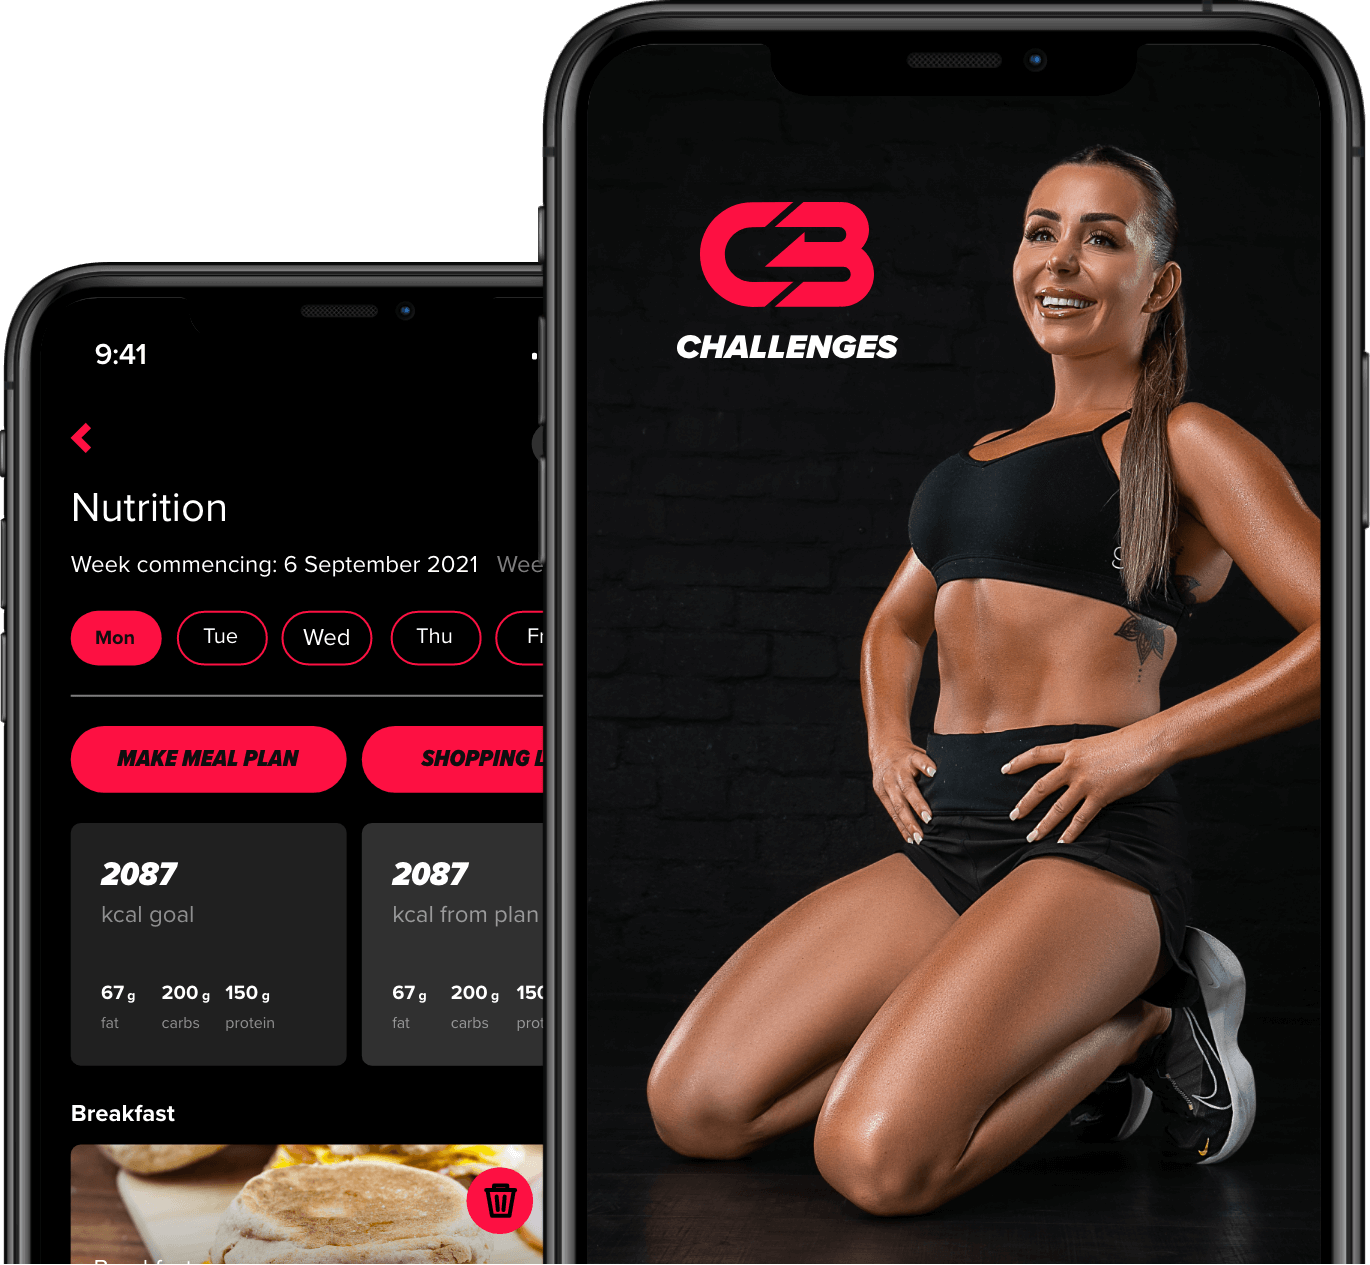 14 Day Fitness Challenges | Courtney Black Fitness App